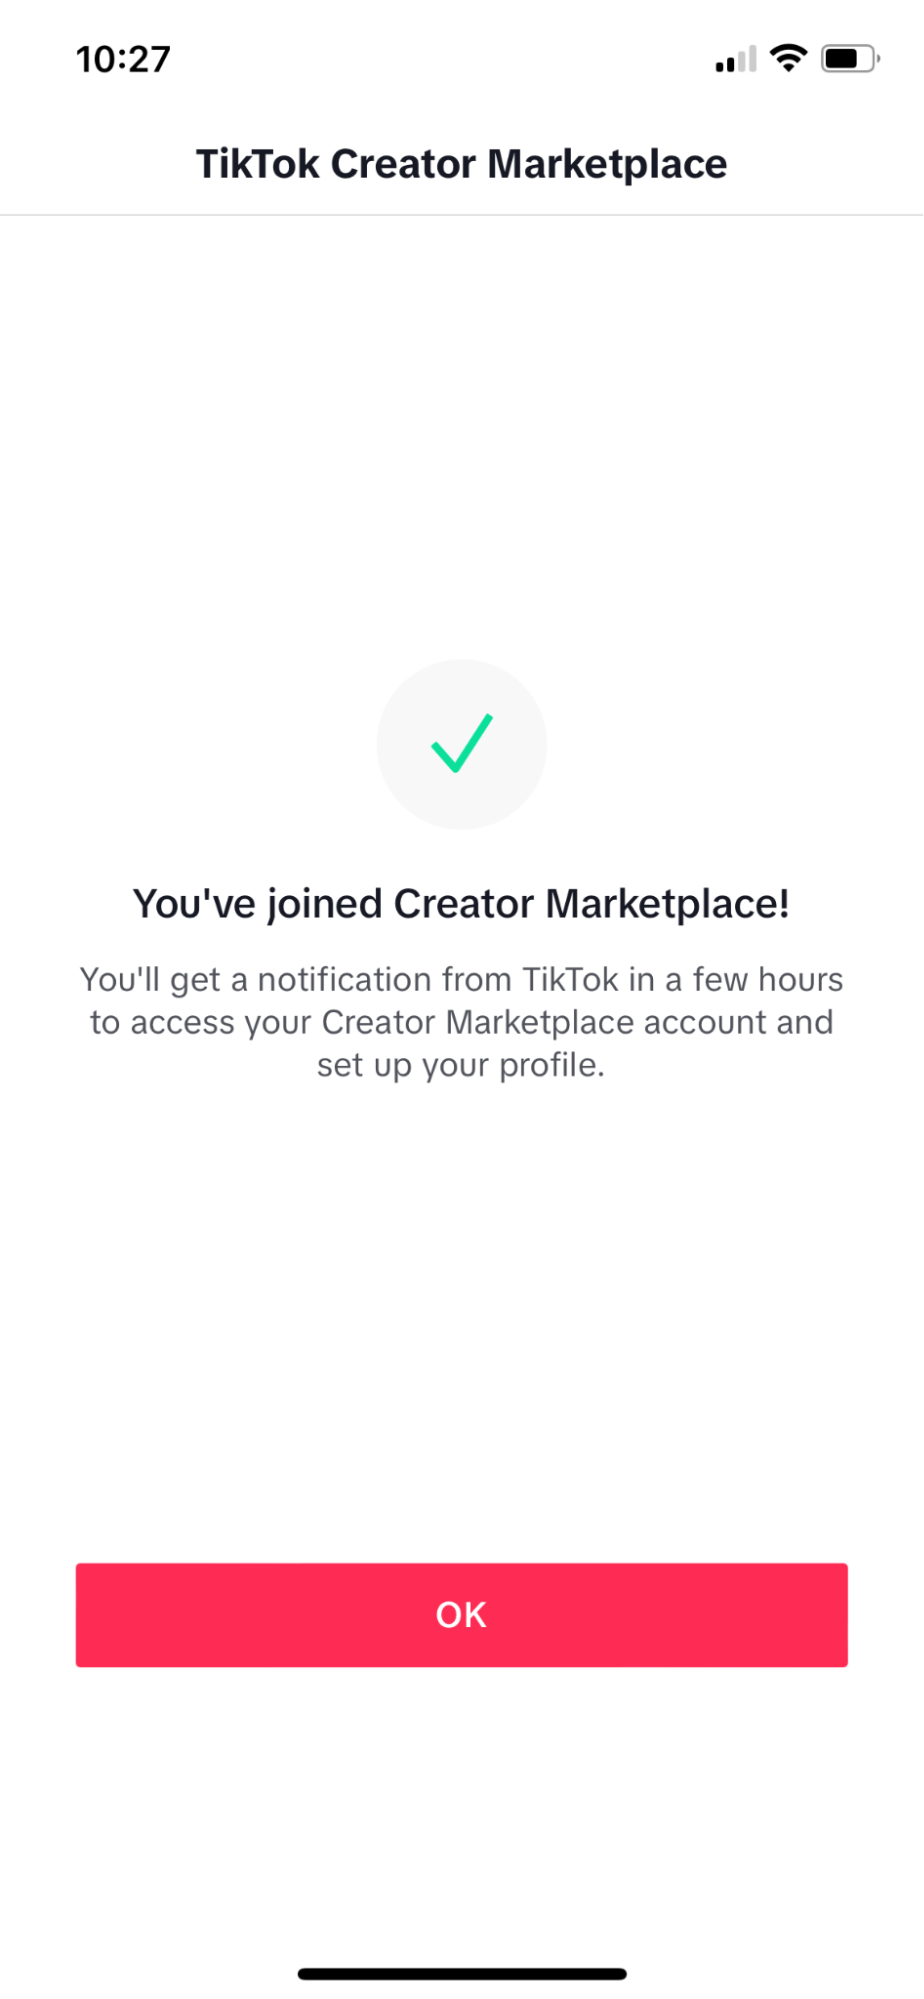 You've joined Creator Marketplace confirmation.png